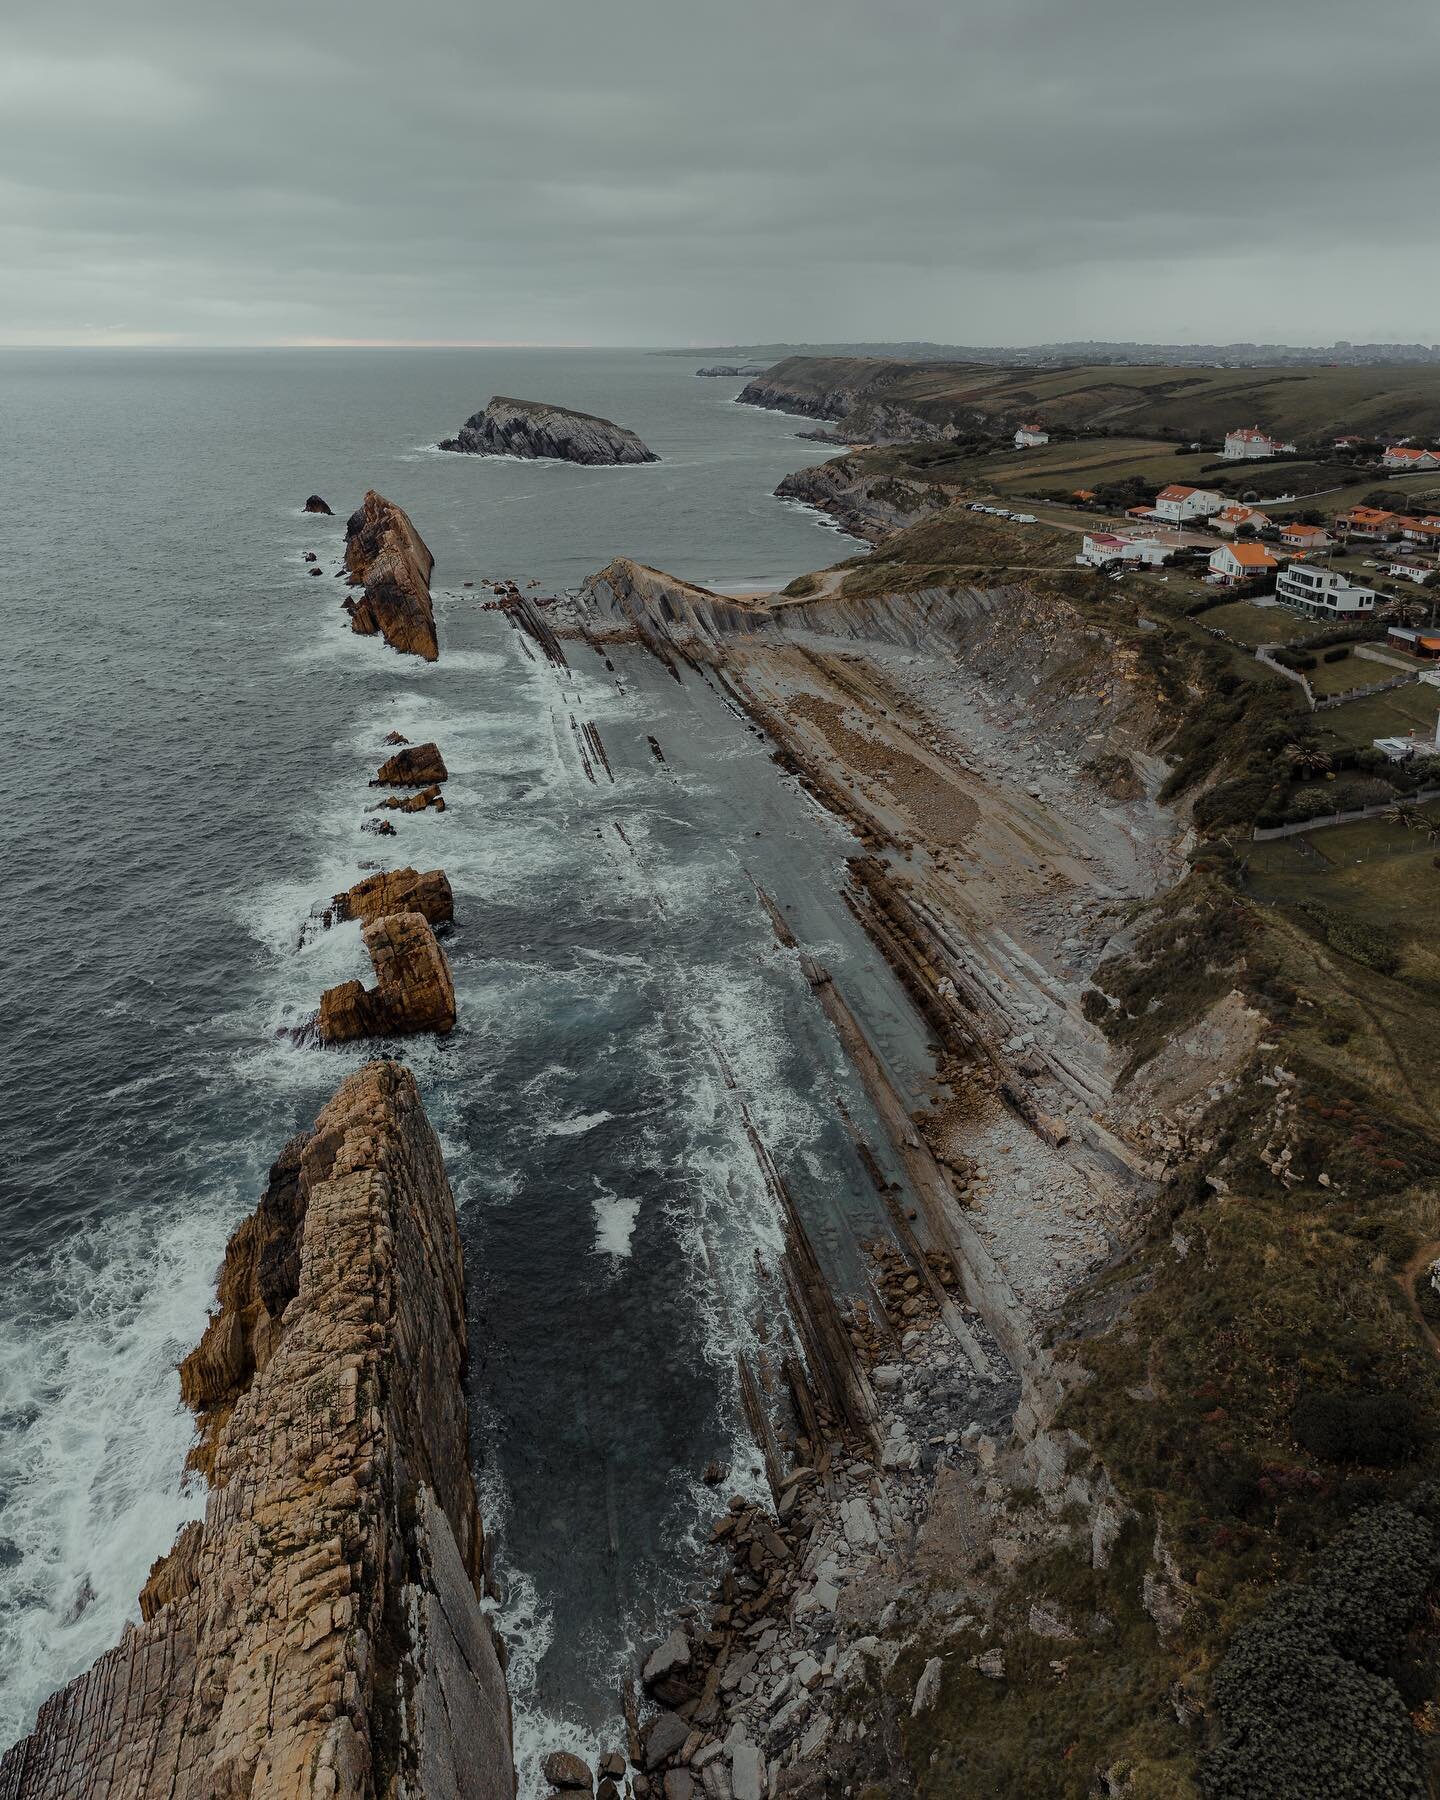 Rough waters and rocky outcrops on Spain&rsquo;s rugged north coast. Now that we have our camper van we can&rsquo;t wait to head back to this beautiful part of the world sometime in the future!
.
.
Edited with my new &lsquo;Cinematic Collection&rsquo